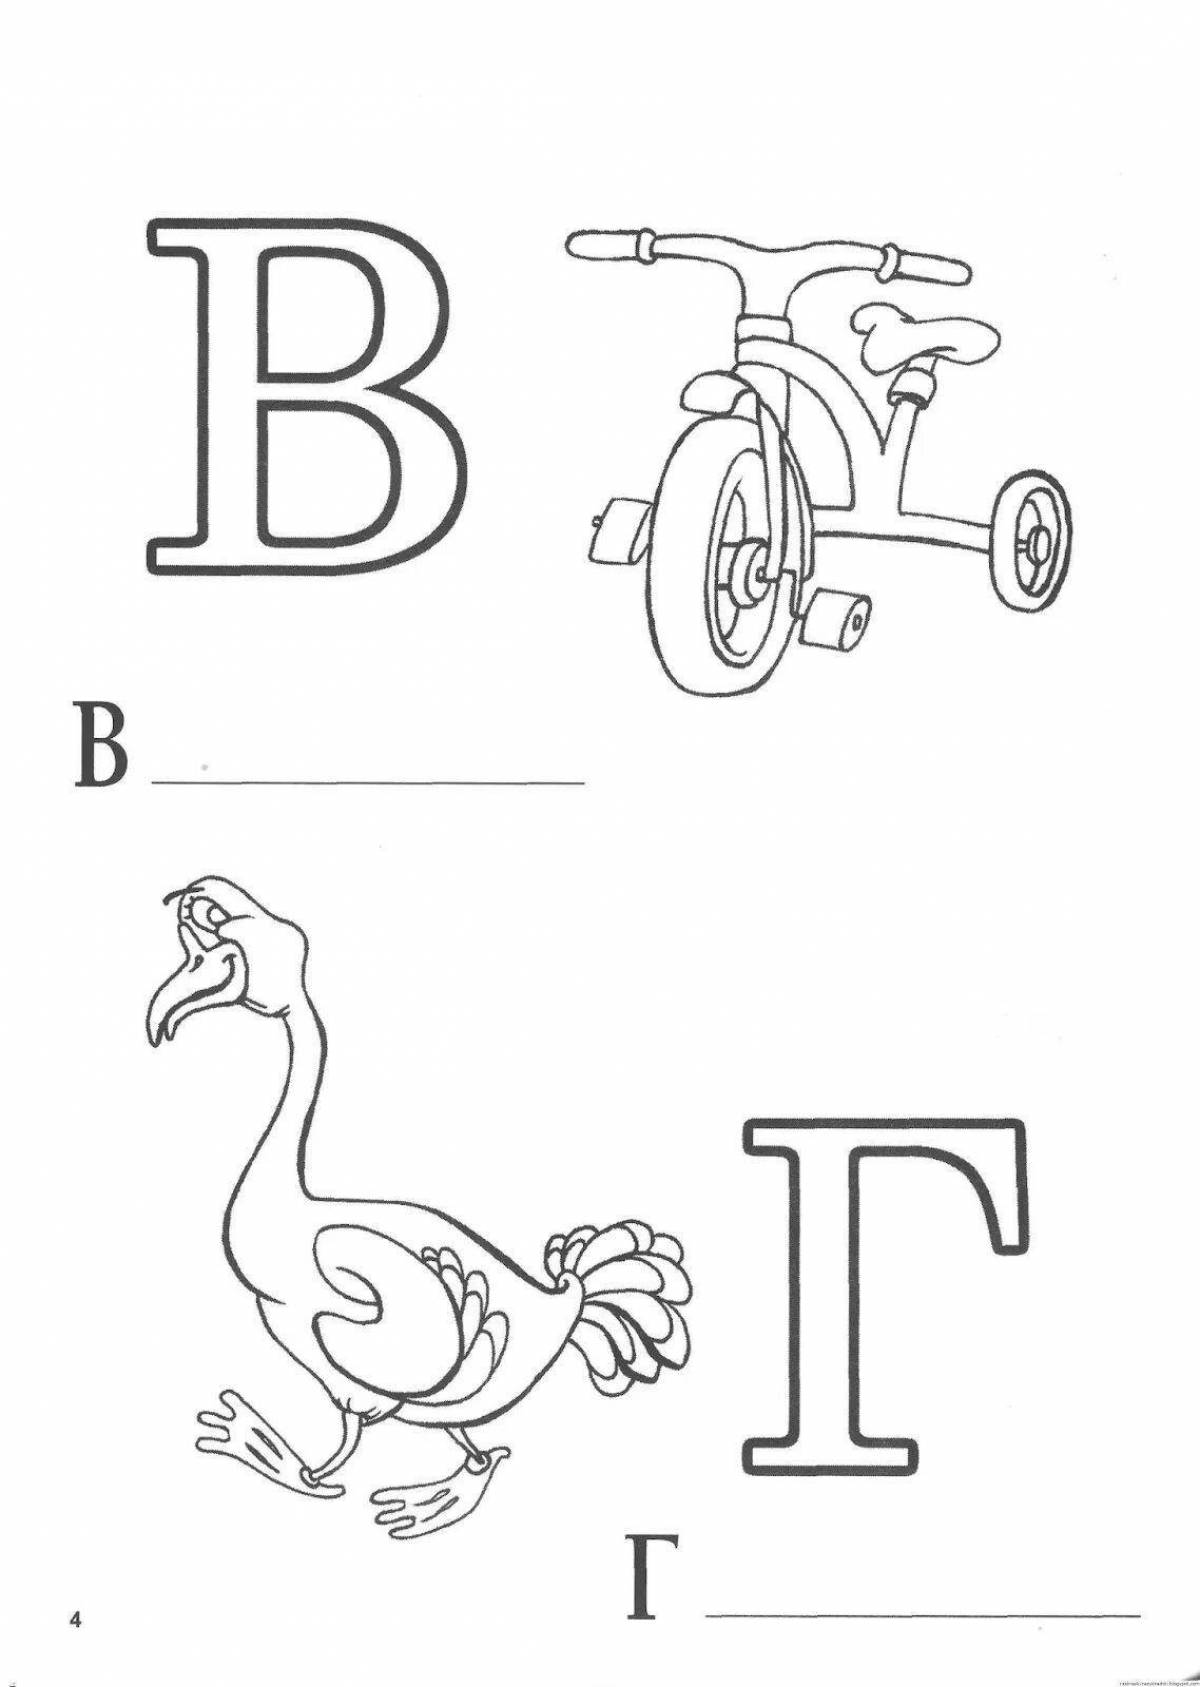 A fun coloring book with letters for preschoolers